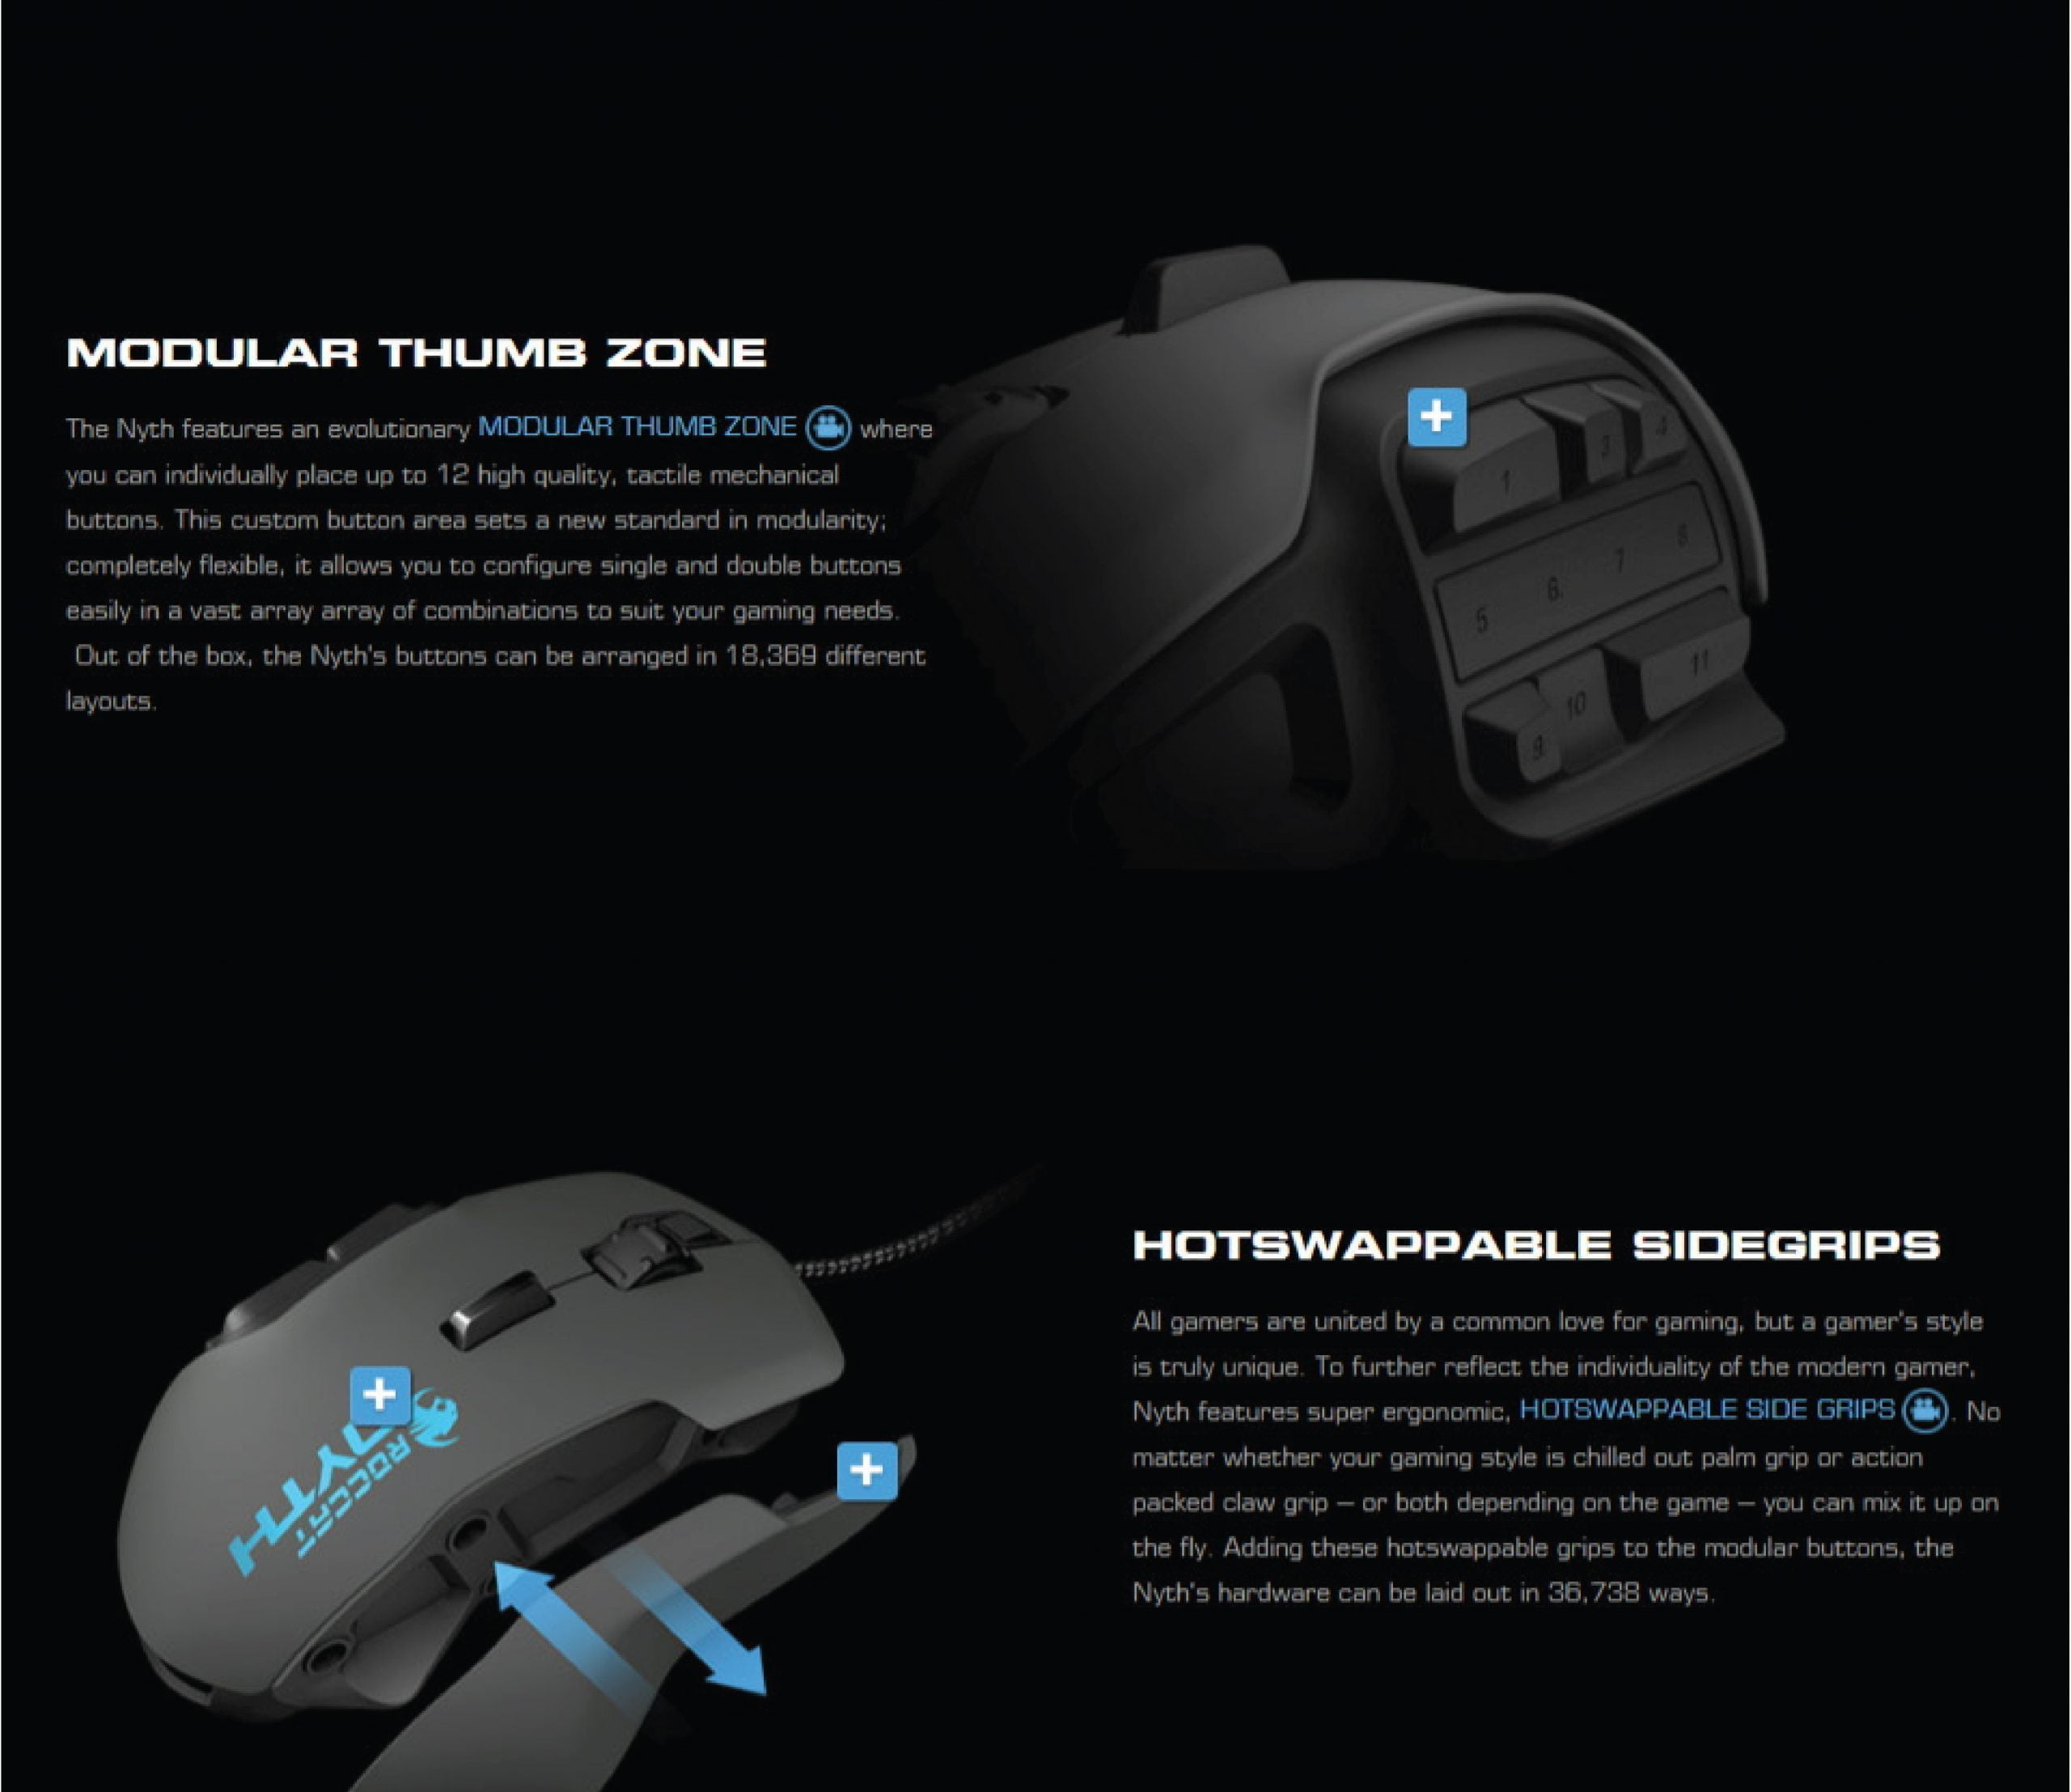 1S 02 Scaled Roccat &Lt;Div Id=&Quot;Shopify-Section-Product-Template&Quot; Class=&Quot;Shopify-Section&Quot;&Gt; &Lt;Div Id=&Quot;Productsection-Product-Template&Quot; Class=&Quot;Product-Template__Container Page-Width&Quot; Data-Section-Id=&Quot;Product-Template&Quot; Data-Section-Type=&Quot;Product&Quot; Data-Enable-History-State=&Quot;True&Quot; Data-Ajax-Enabled=&Quot;True&Quot;&Gt; &Lt;Div Class=&Quot;Grid Product-Single Product-Single--Medium-Media&Quot;&Gt; &Lt;Div Class=&Quot;Grid__Item Medium-Up--One-Half&Quot;&Gt; &Lt;Div Class=&Quot;Product-Single__Description Rte&Quot;&Gt; The Roccat Nyth Is A Customizable 18-Button Mmo Gaming Mouse With A Laser Sensor With Up To 12.000 Dpi. Order Yours Today. &Nbsp; &Lt;/Div&Gt; &Lt;/Div&Gt; &Lt;/Div&Gt; &Lt;/Div&Gt; &Lt;/Div&Gt; Https://Youtu.be/5Pwxxksrsty Roccat Roccat Nyth Modular Mmo Gaming Mouse, White